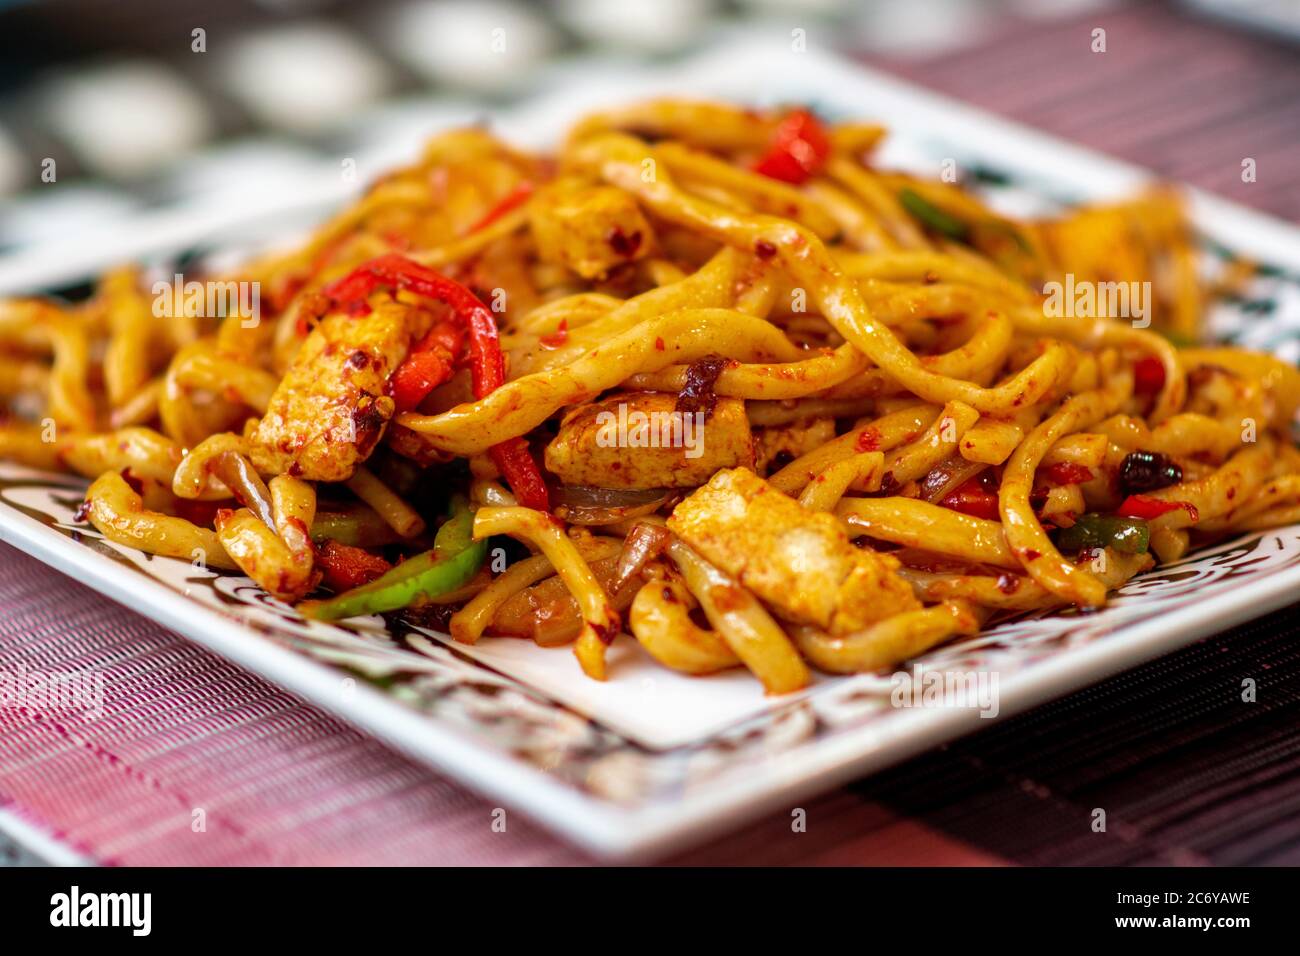 Traditional Central Asian Uyghur dry stir fried noodle dish, Korma Chop. Signature fried noodles with chives, tofu, onions, and red bell peppers. Stock Photo